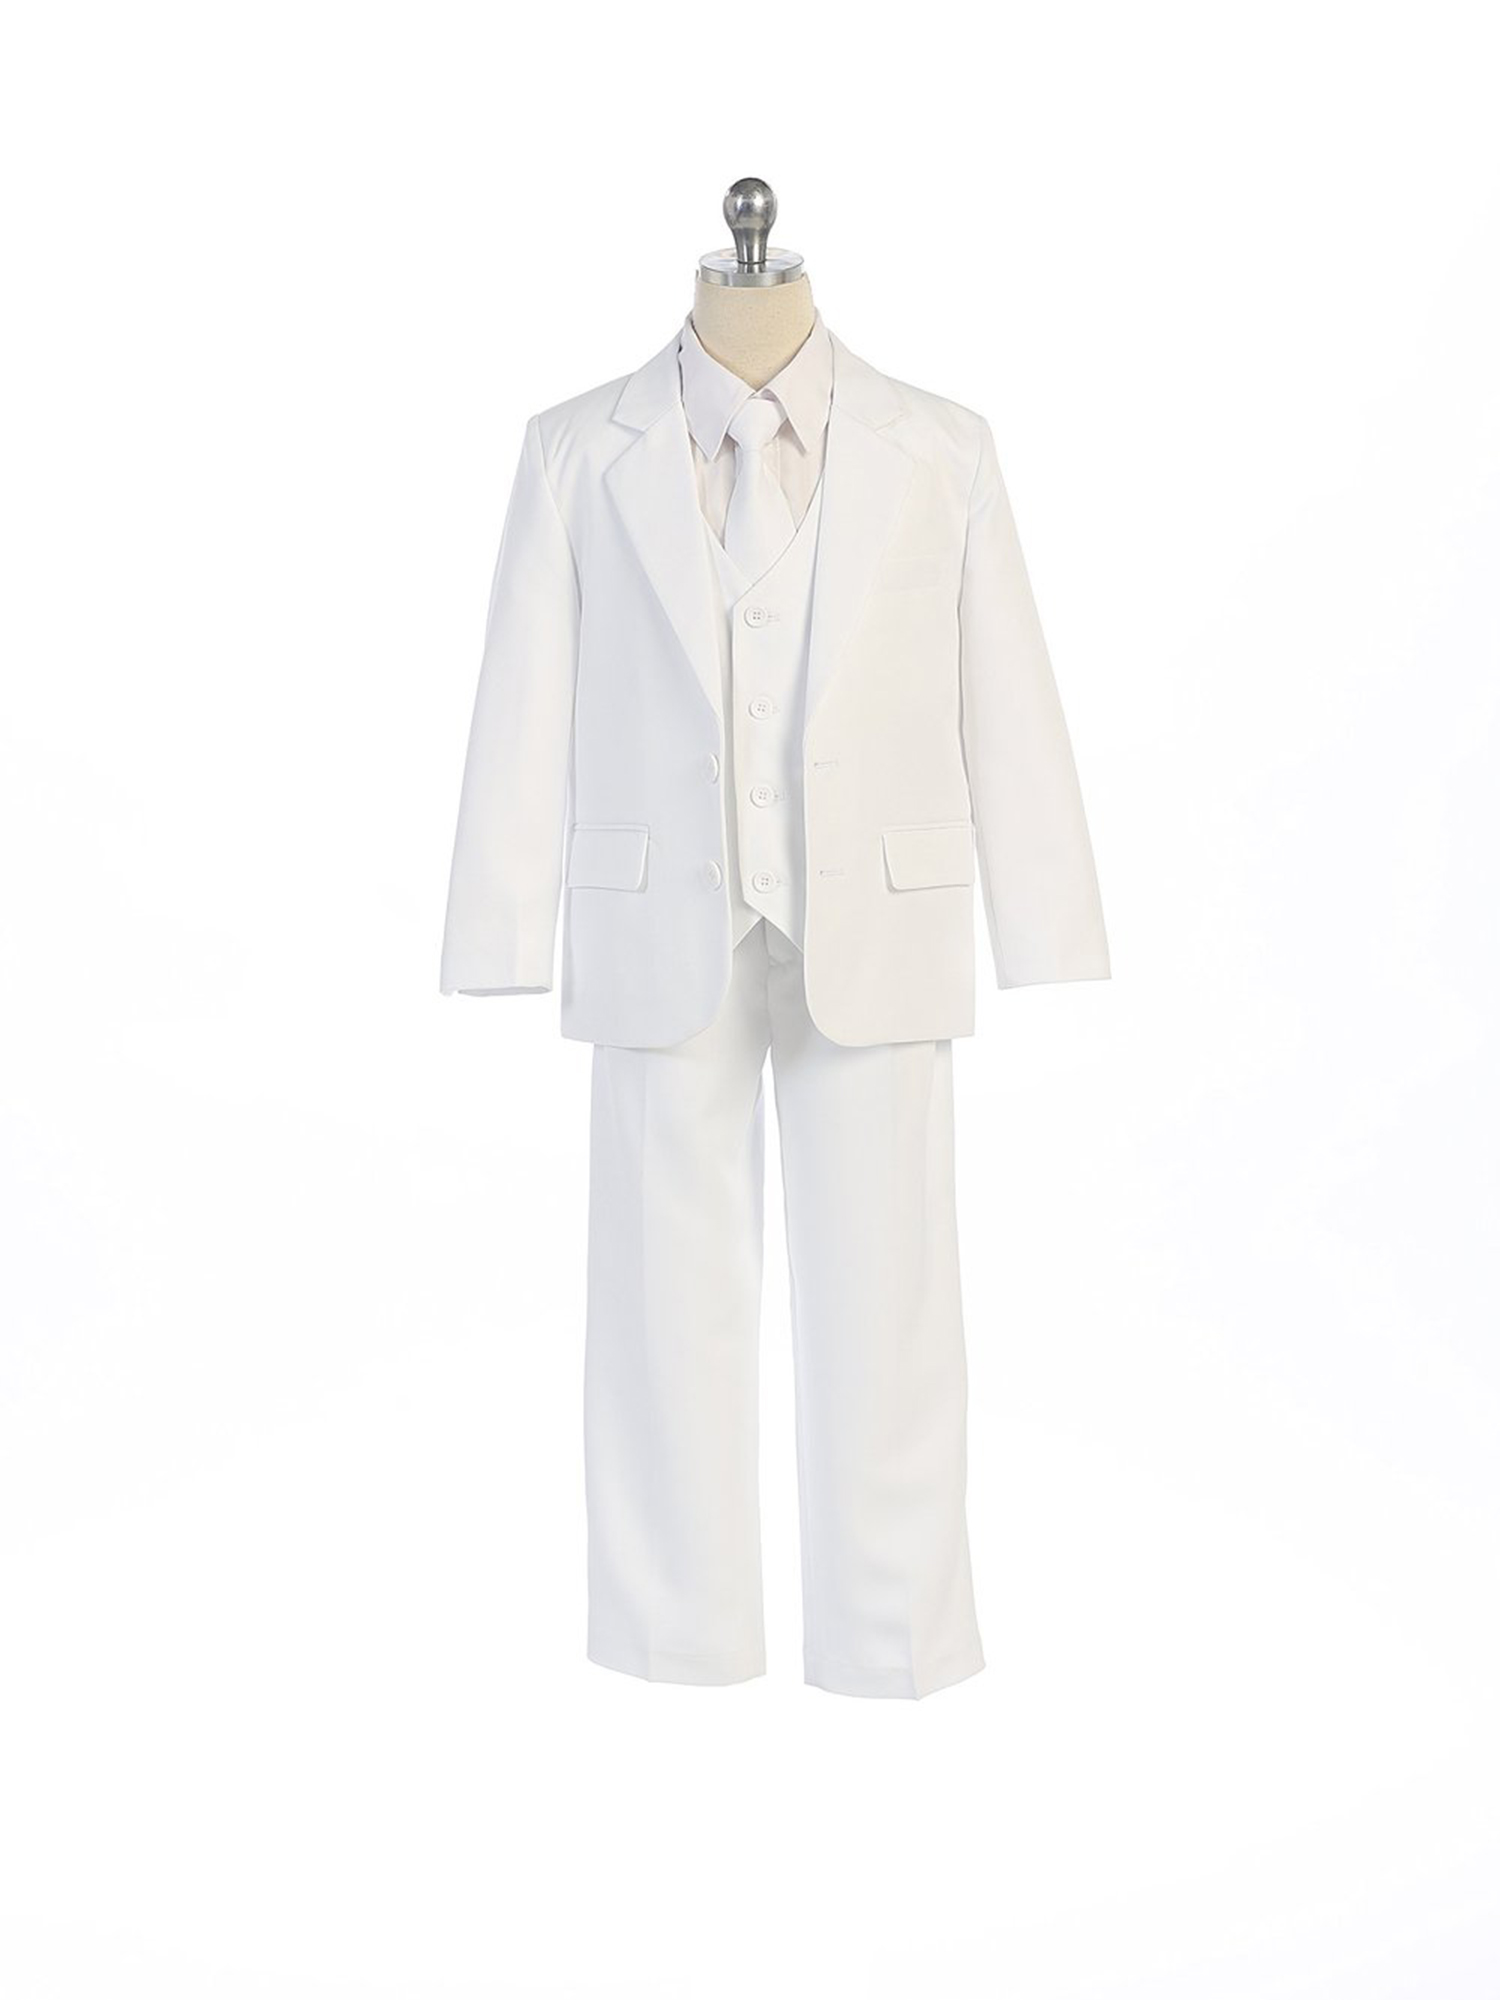 COLE Boys Suit with Shirt and Vest (5-Piece) - (8 Husky, White)